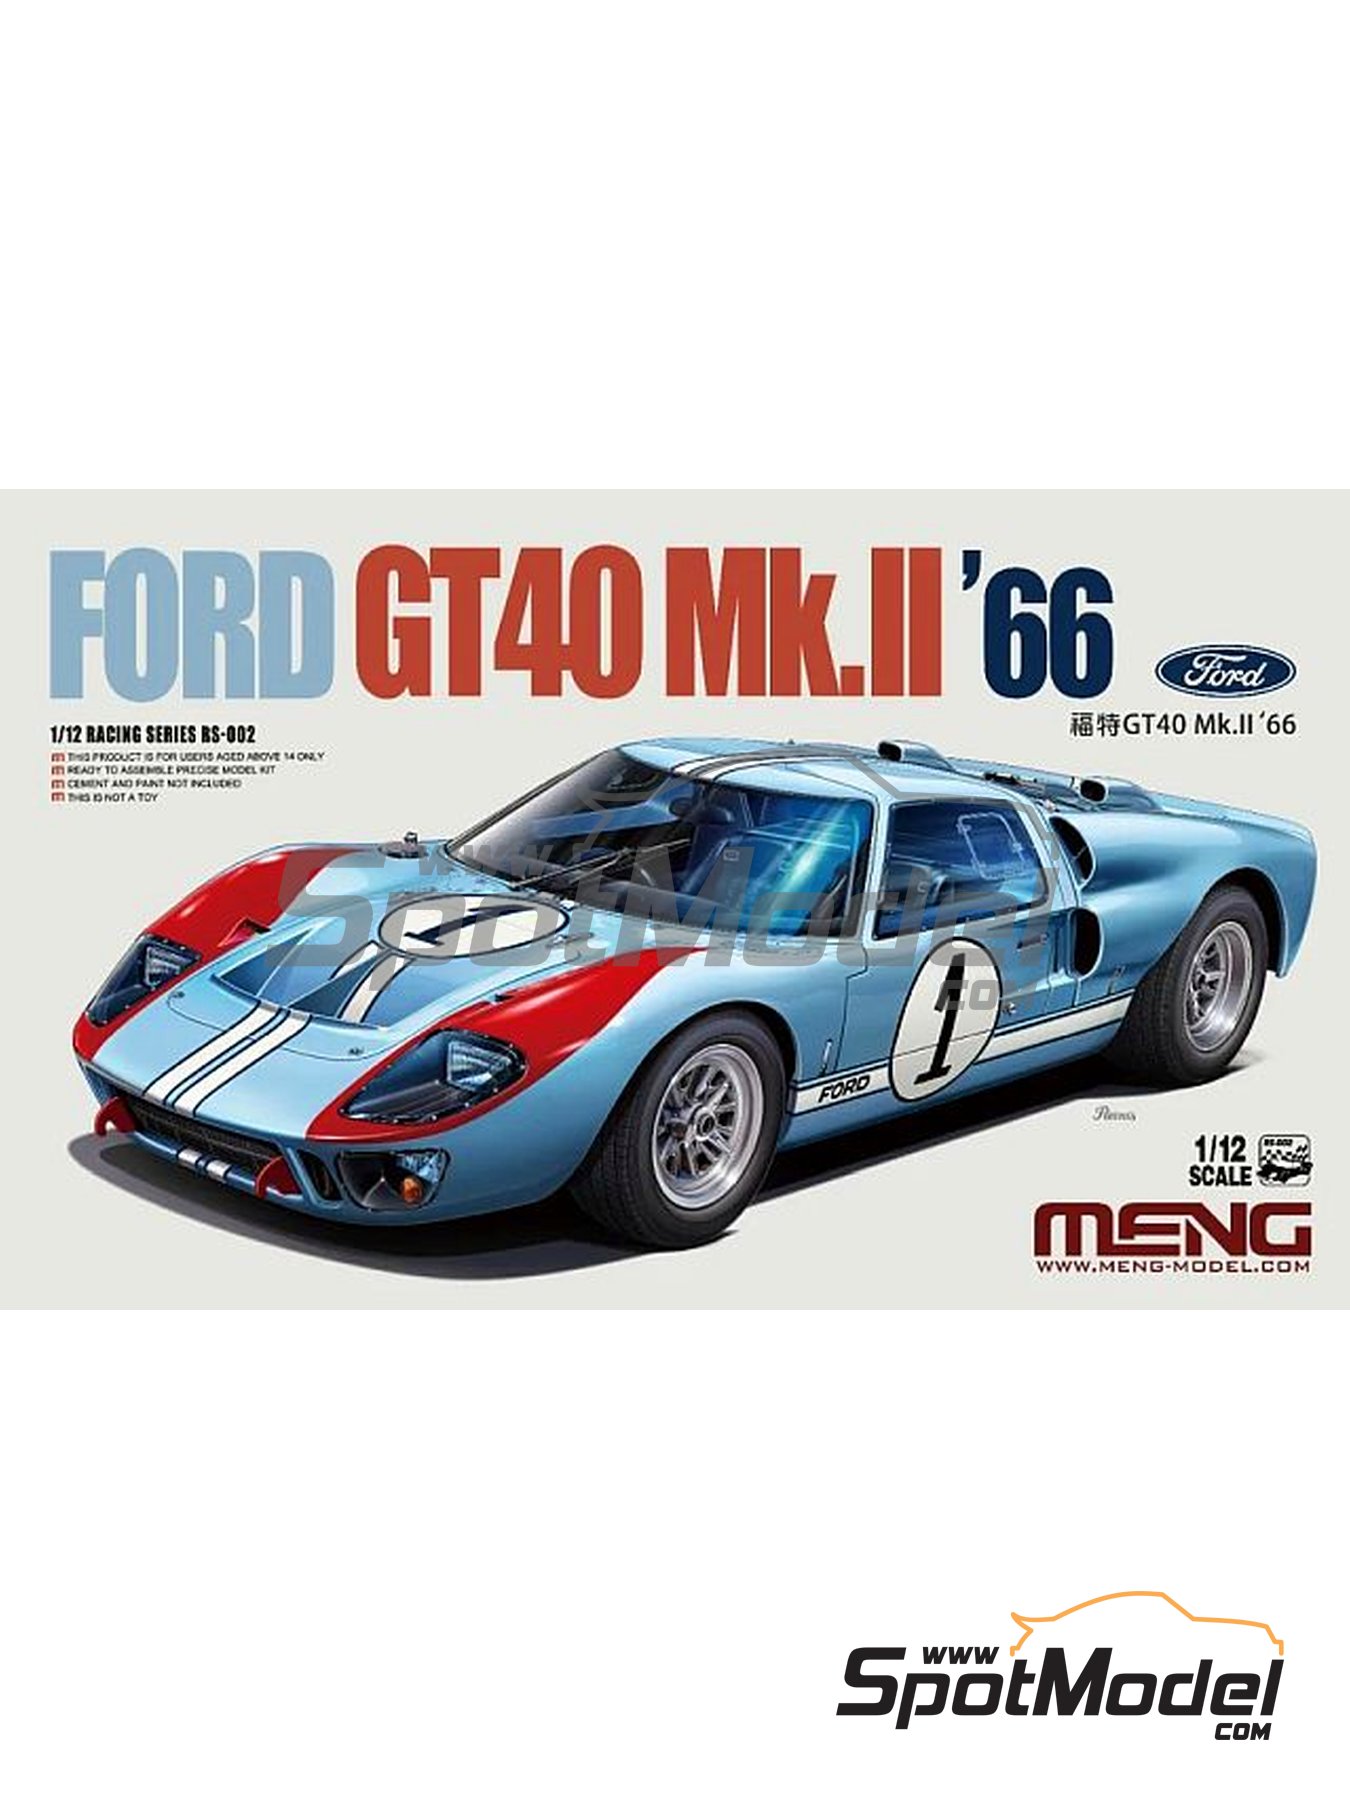 Meng Model RS-002: Car scale model kit 1/12 scale - Ford GT40 Mk